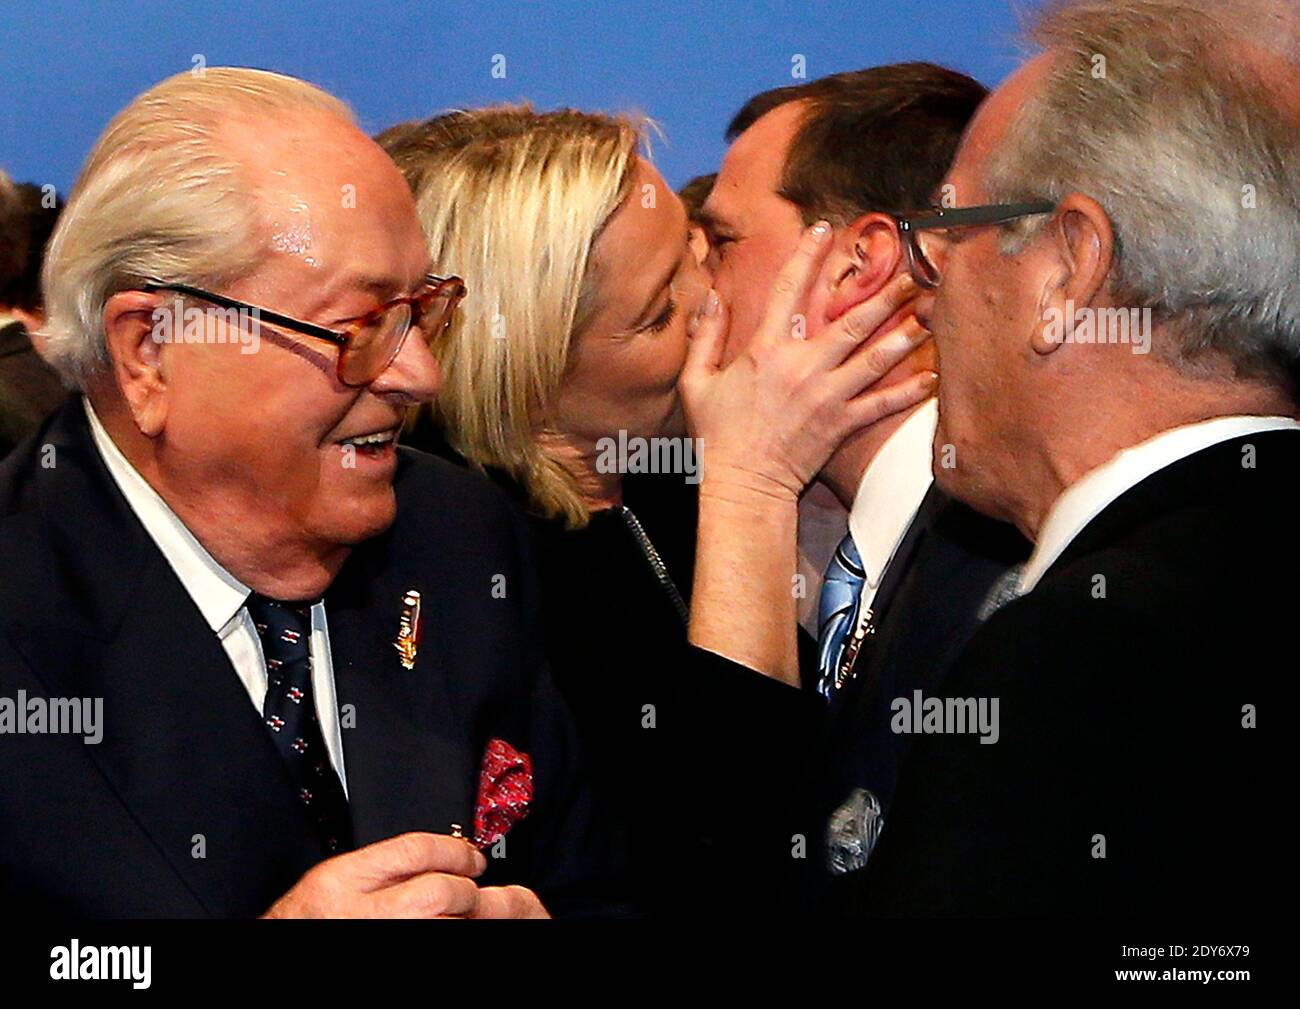 France's far-right National Front party's leader Marine Le Pen kiss her  boyfriend Louis Aliot, with Jean-Marie le Pen at the 15th congress of the  party, in Lyon, France on November 29, 2014.